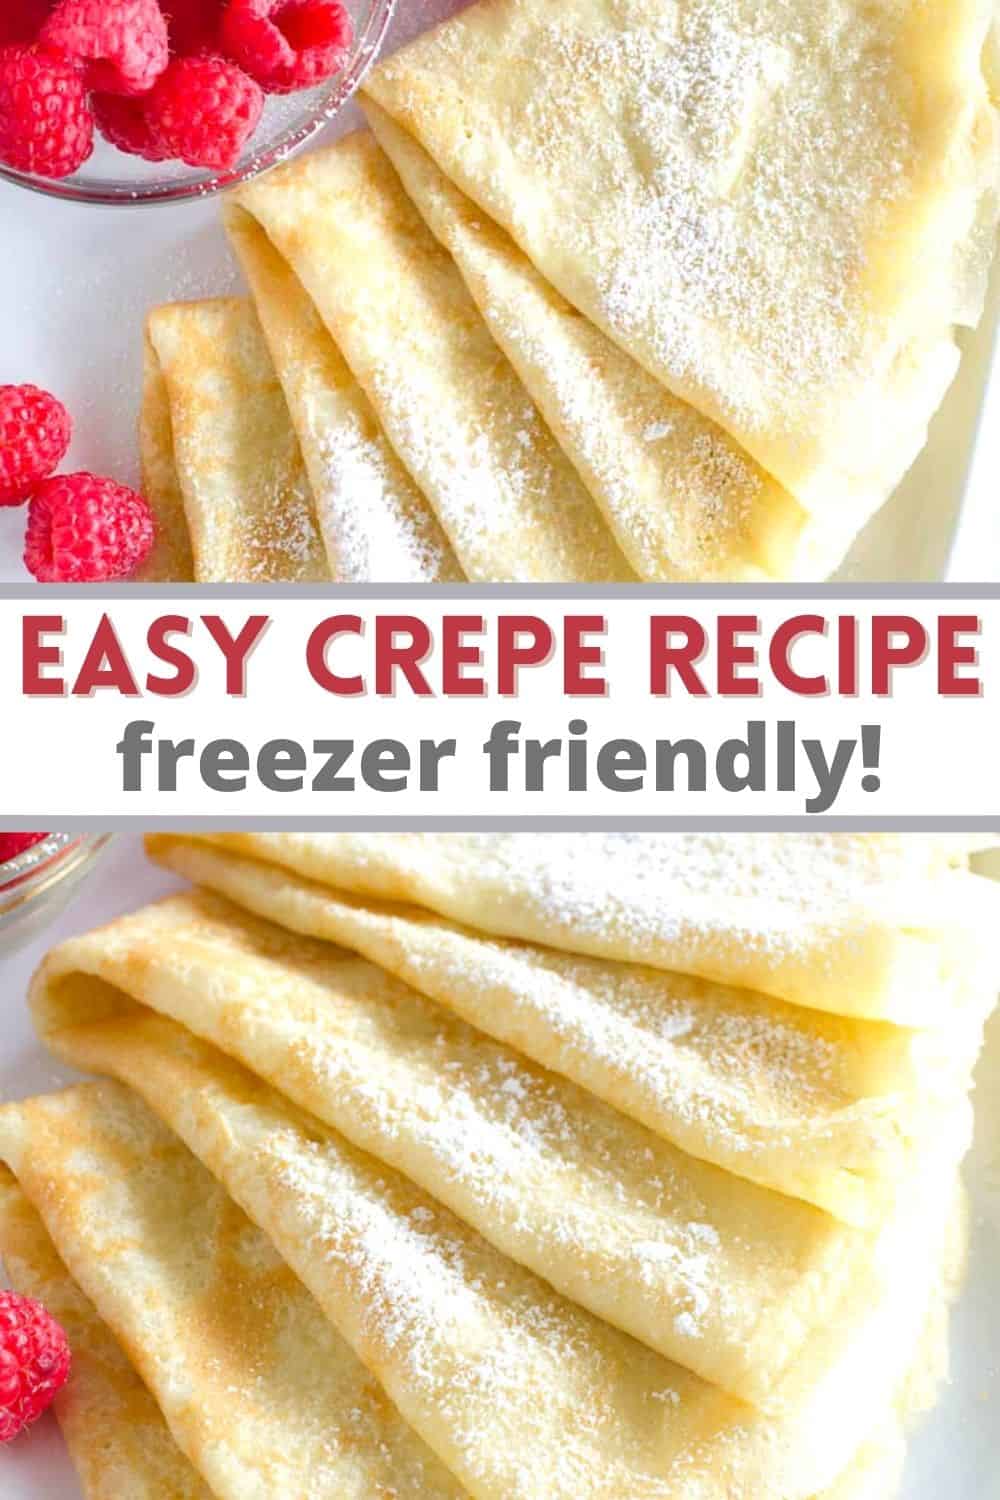 No fancy equipment needed for this easy crepe recipe. Mix flour, milk, eggs and baking powder in a blender to make these crepes for breakfast or dessert!